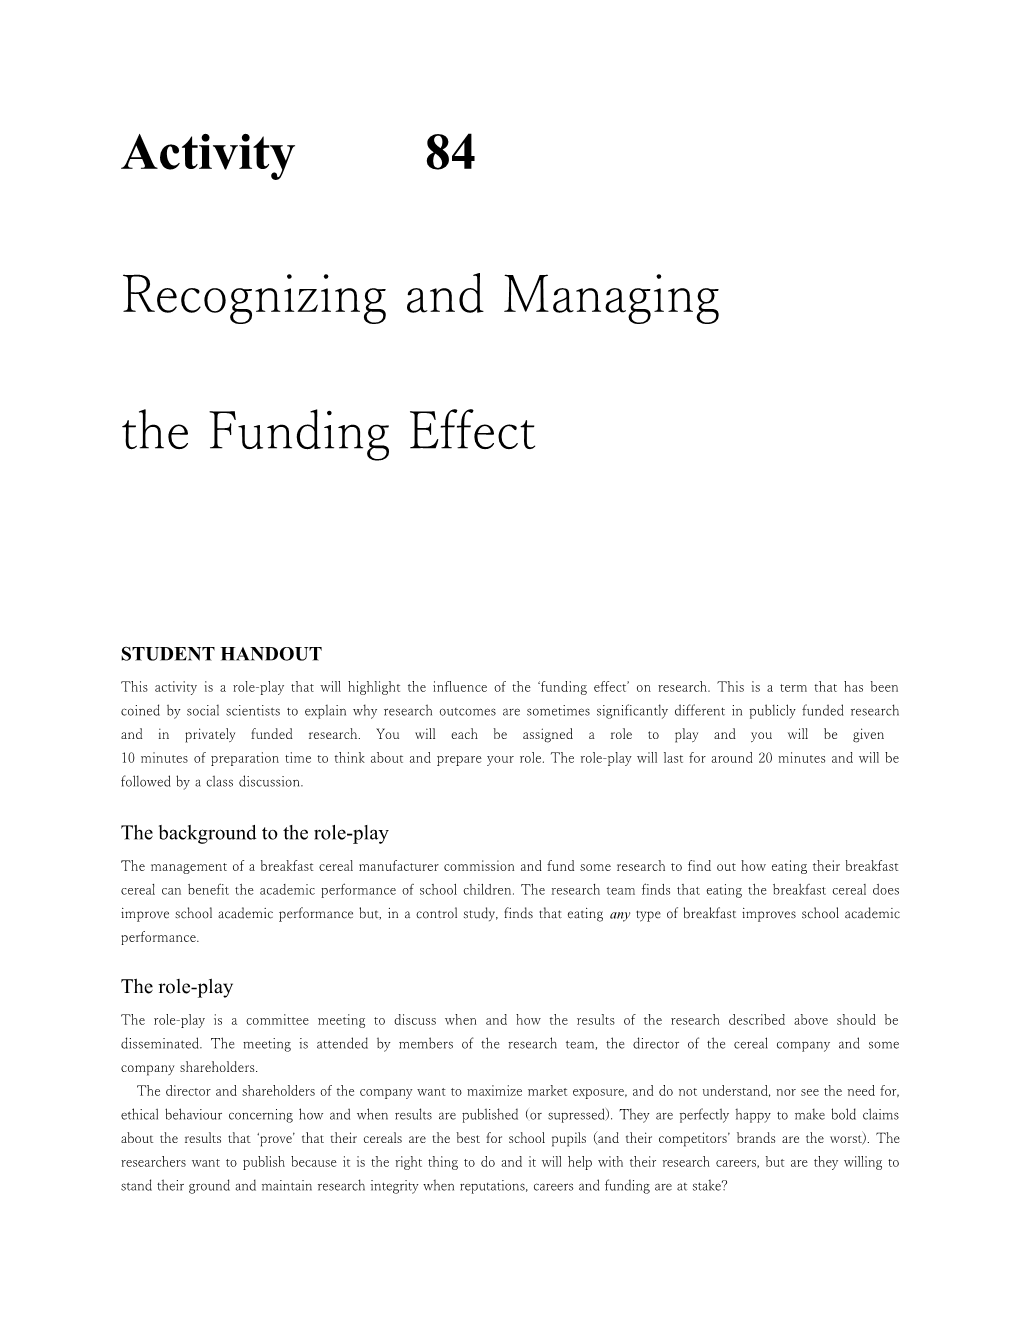 Recognizing and Managing the Funding Effect